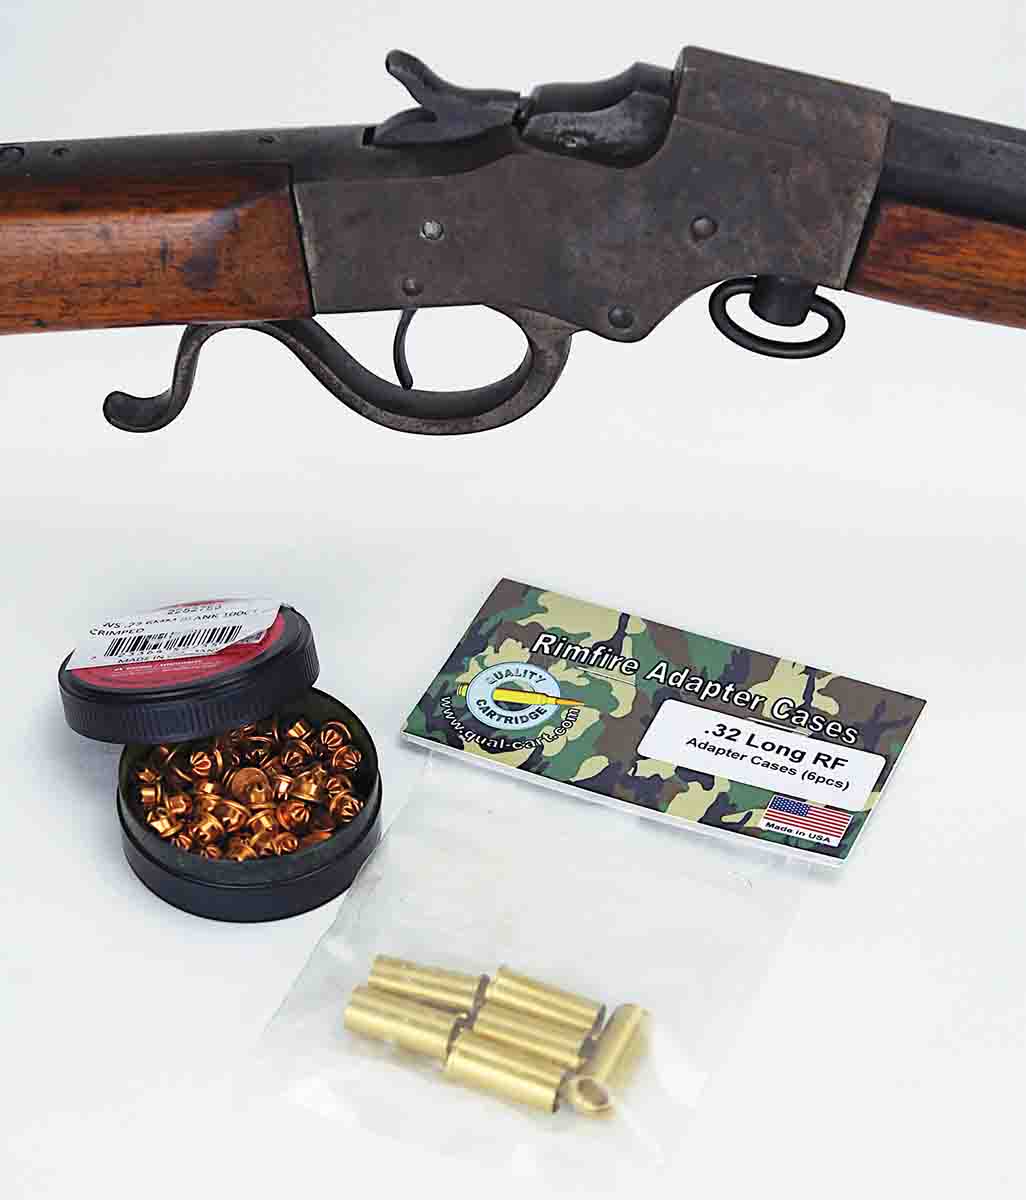 Quality Cartridge .32 S&W Long adapters utilize .22 Short blanks to ignite charges of black powder.